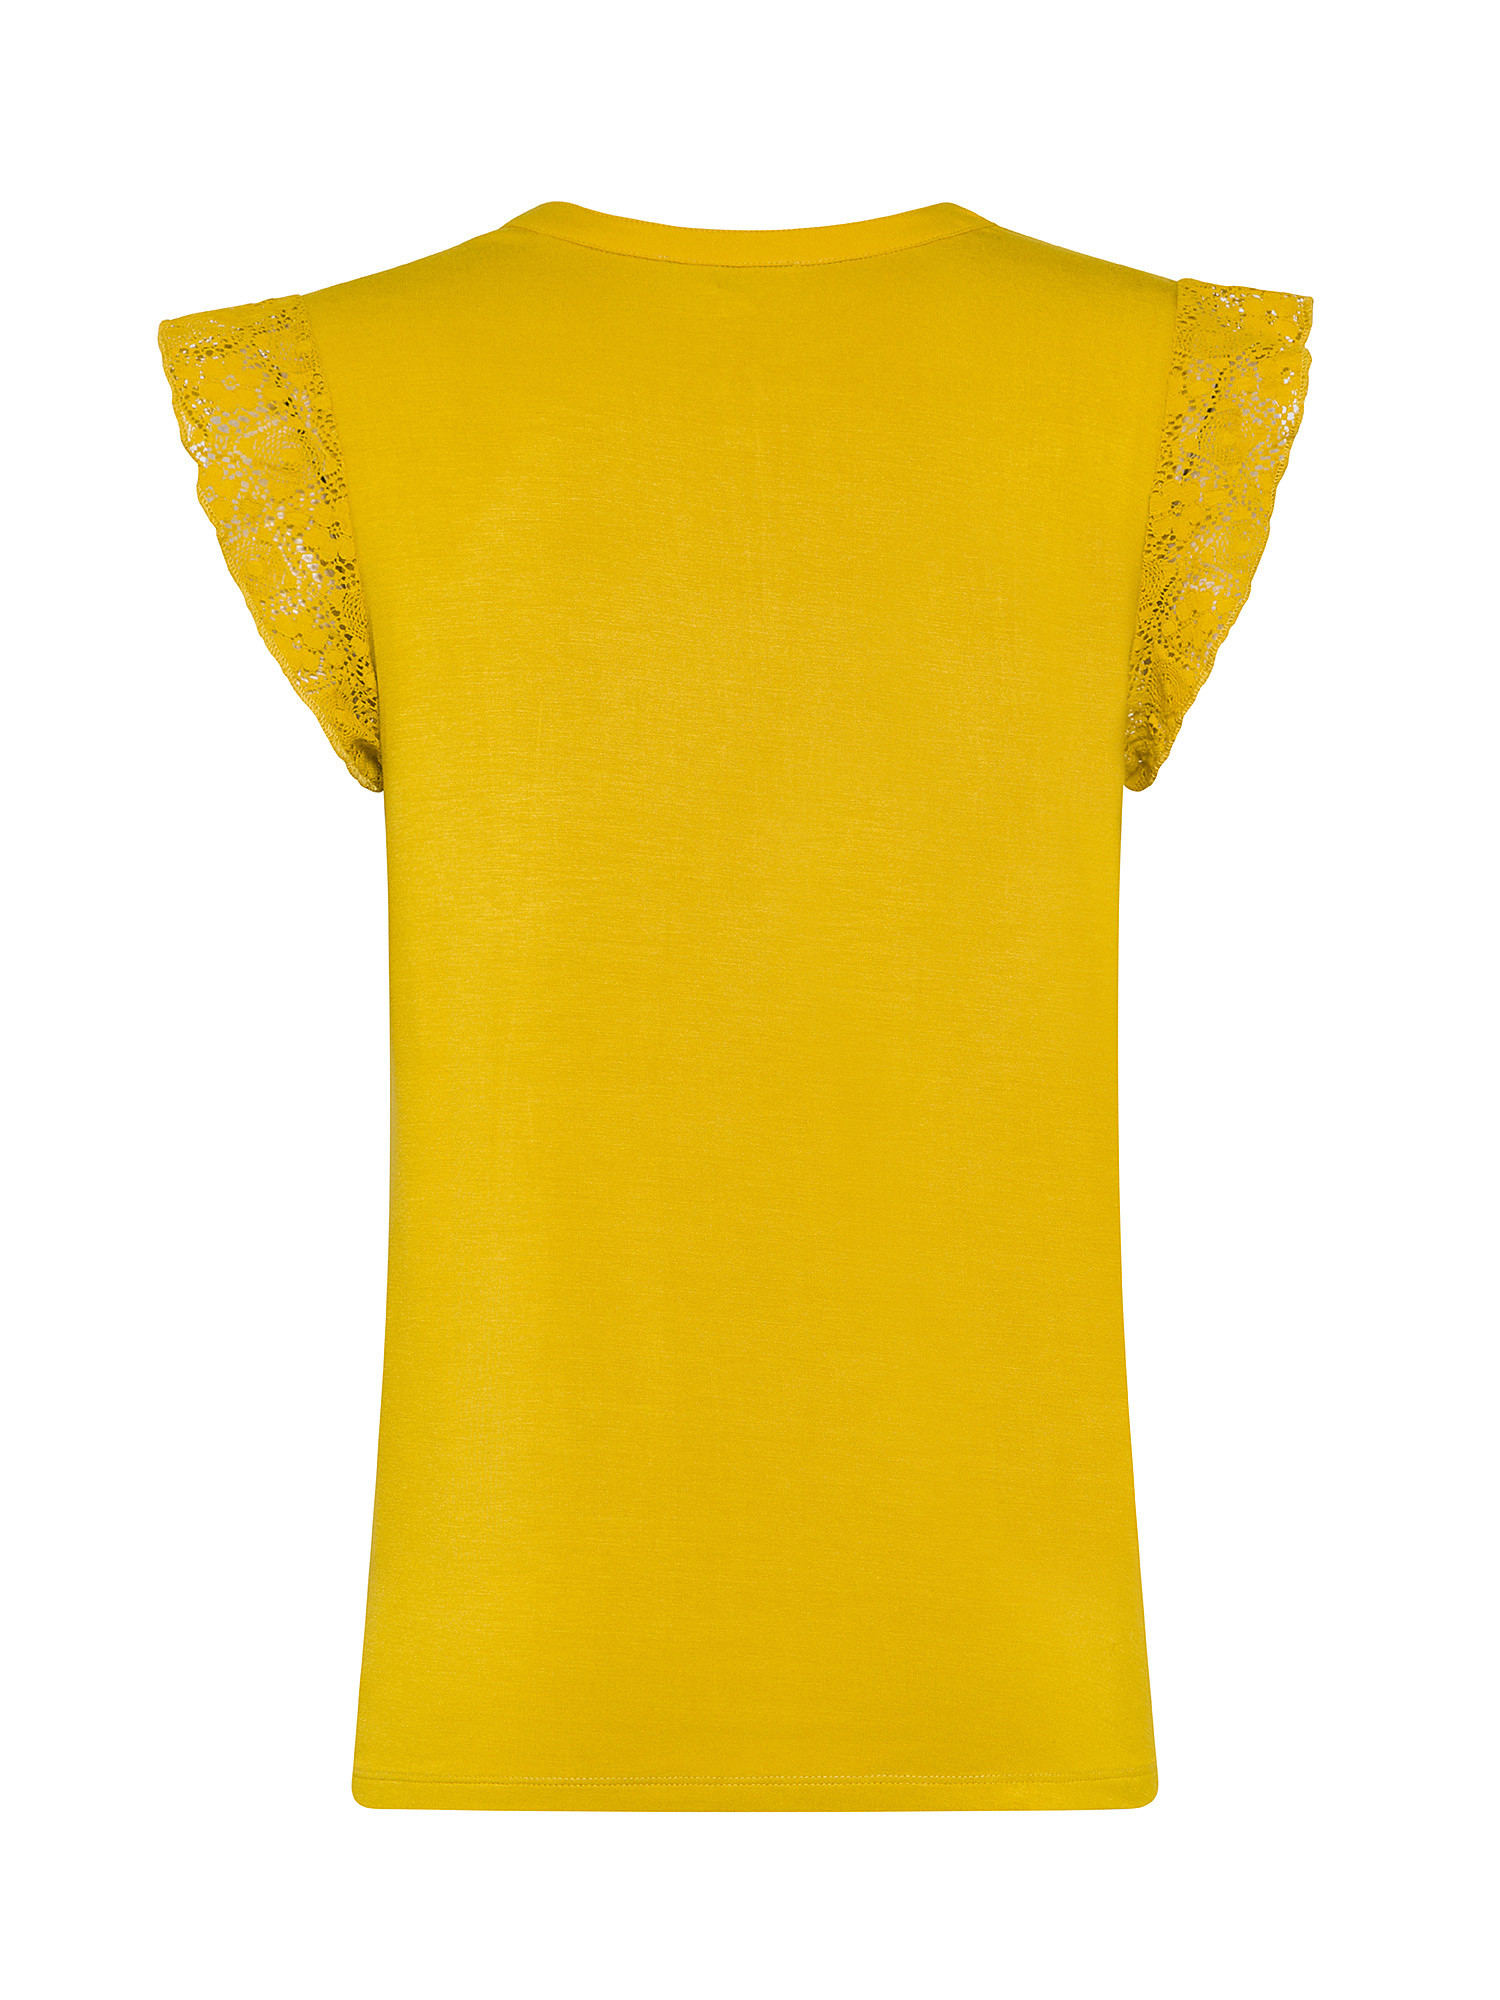 Koan - T-shirt with lace inserts, Yellow, large image number 1